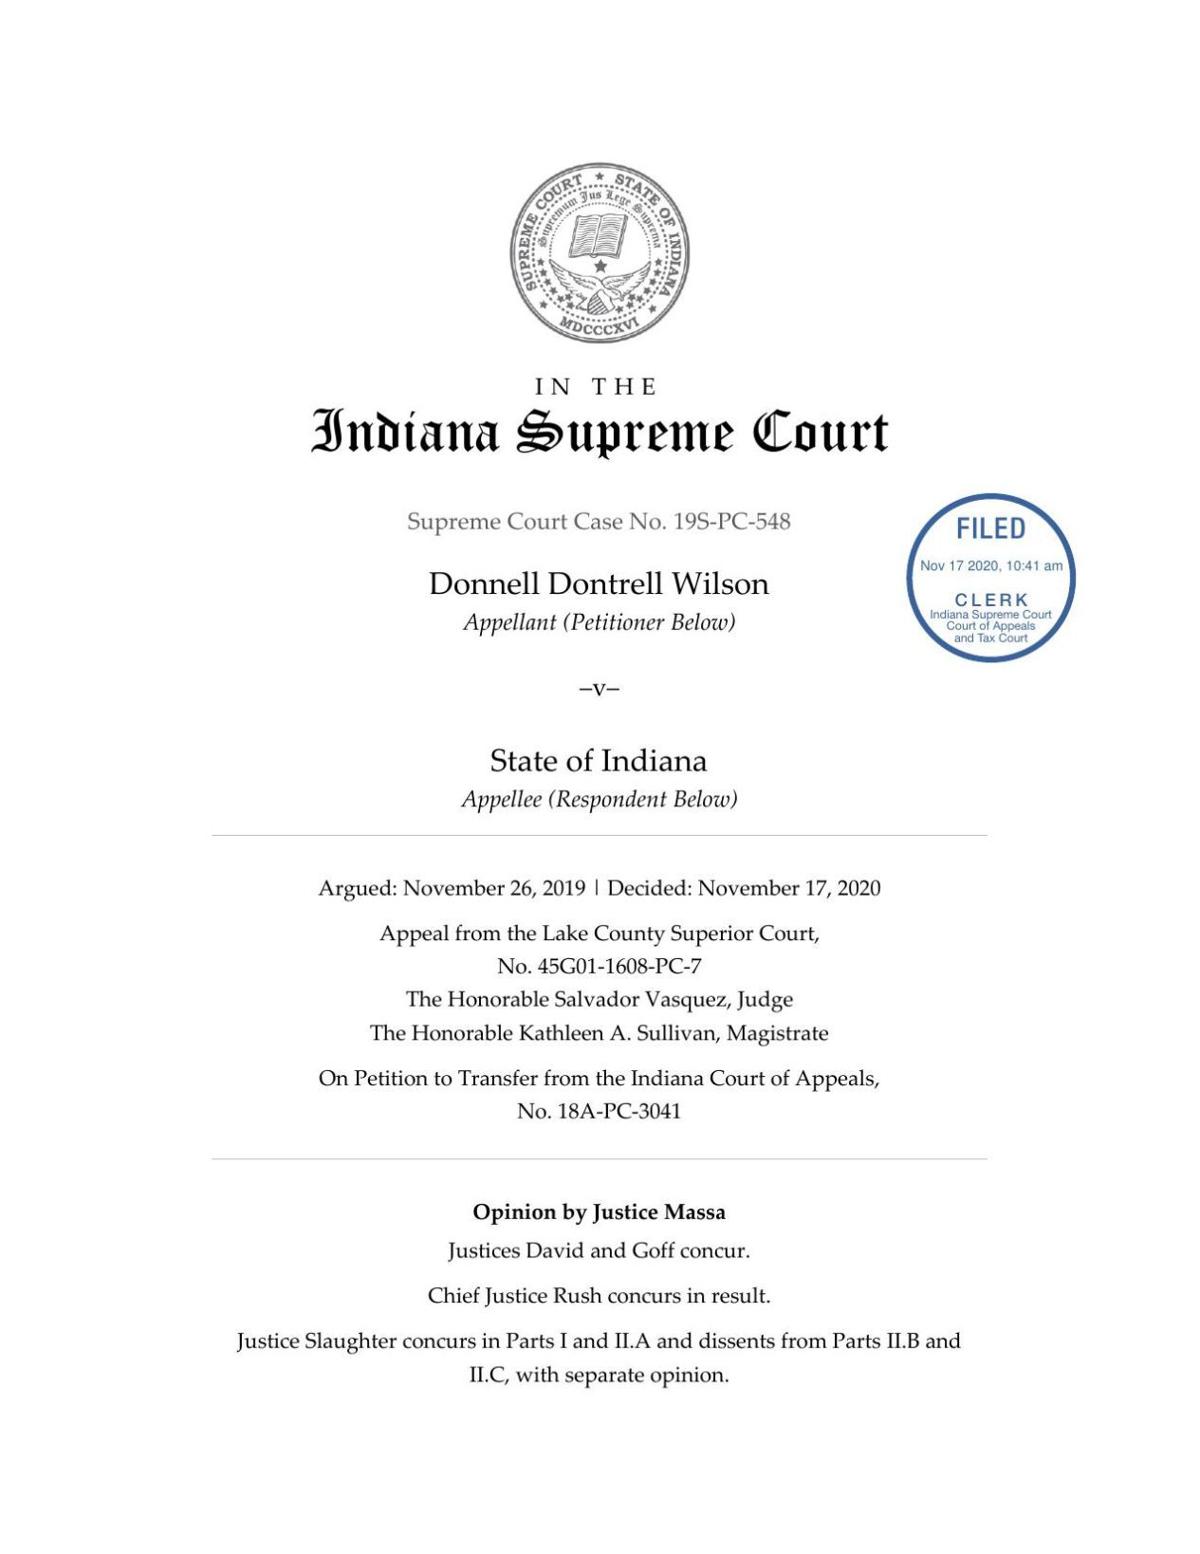 Wilson v. State ruling of Indiana Supreme Court